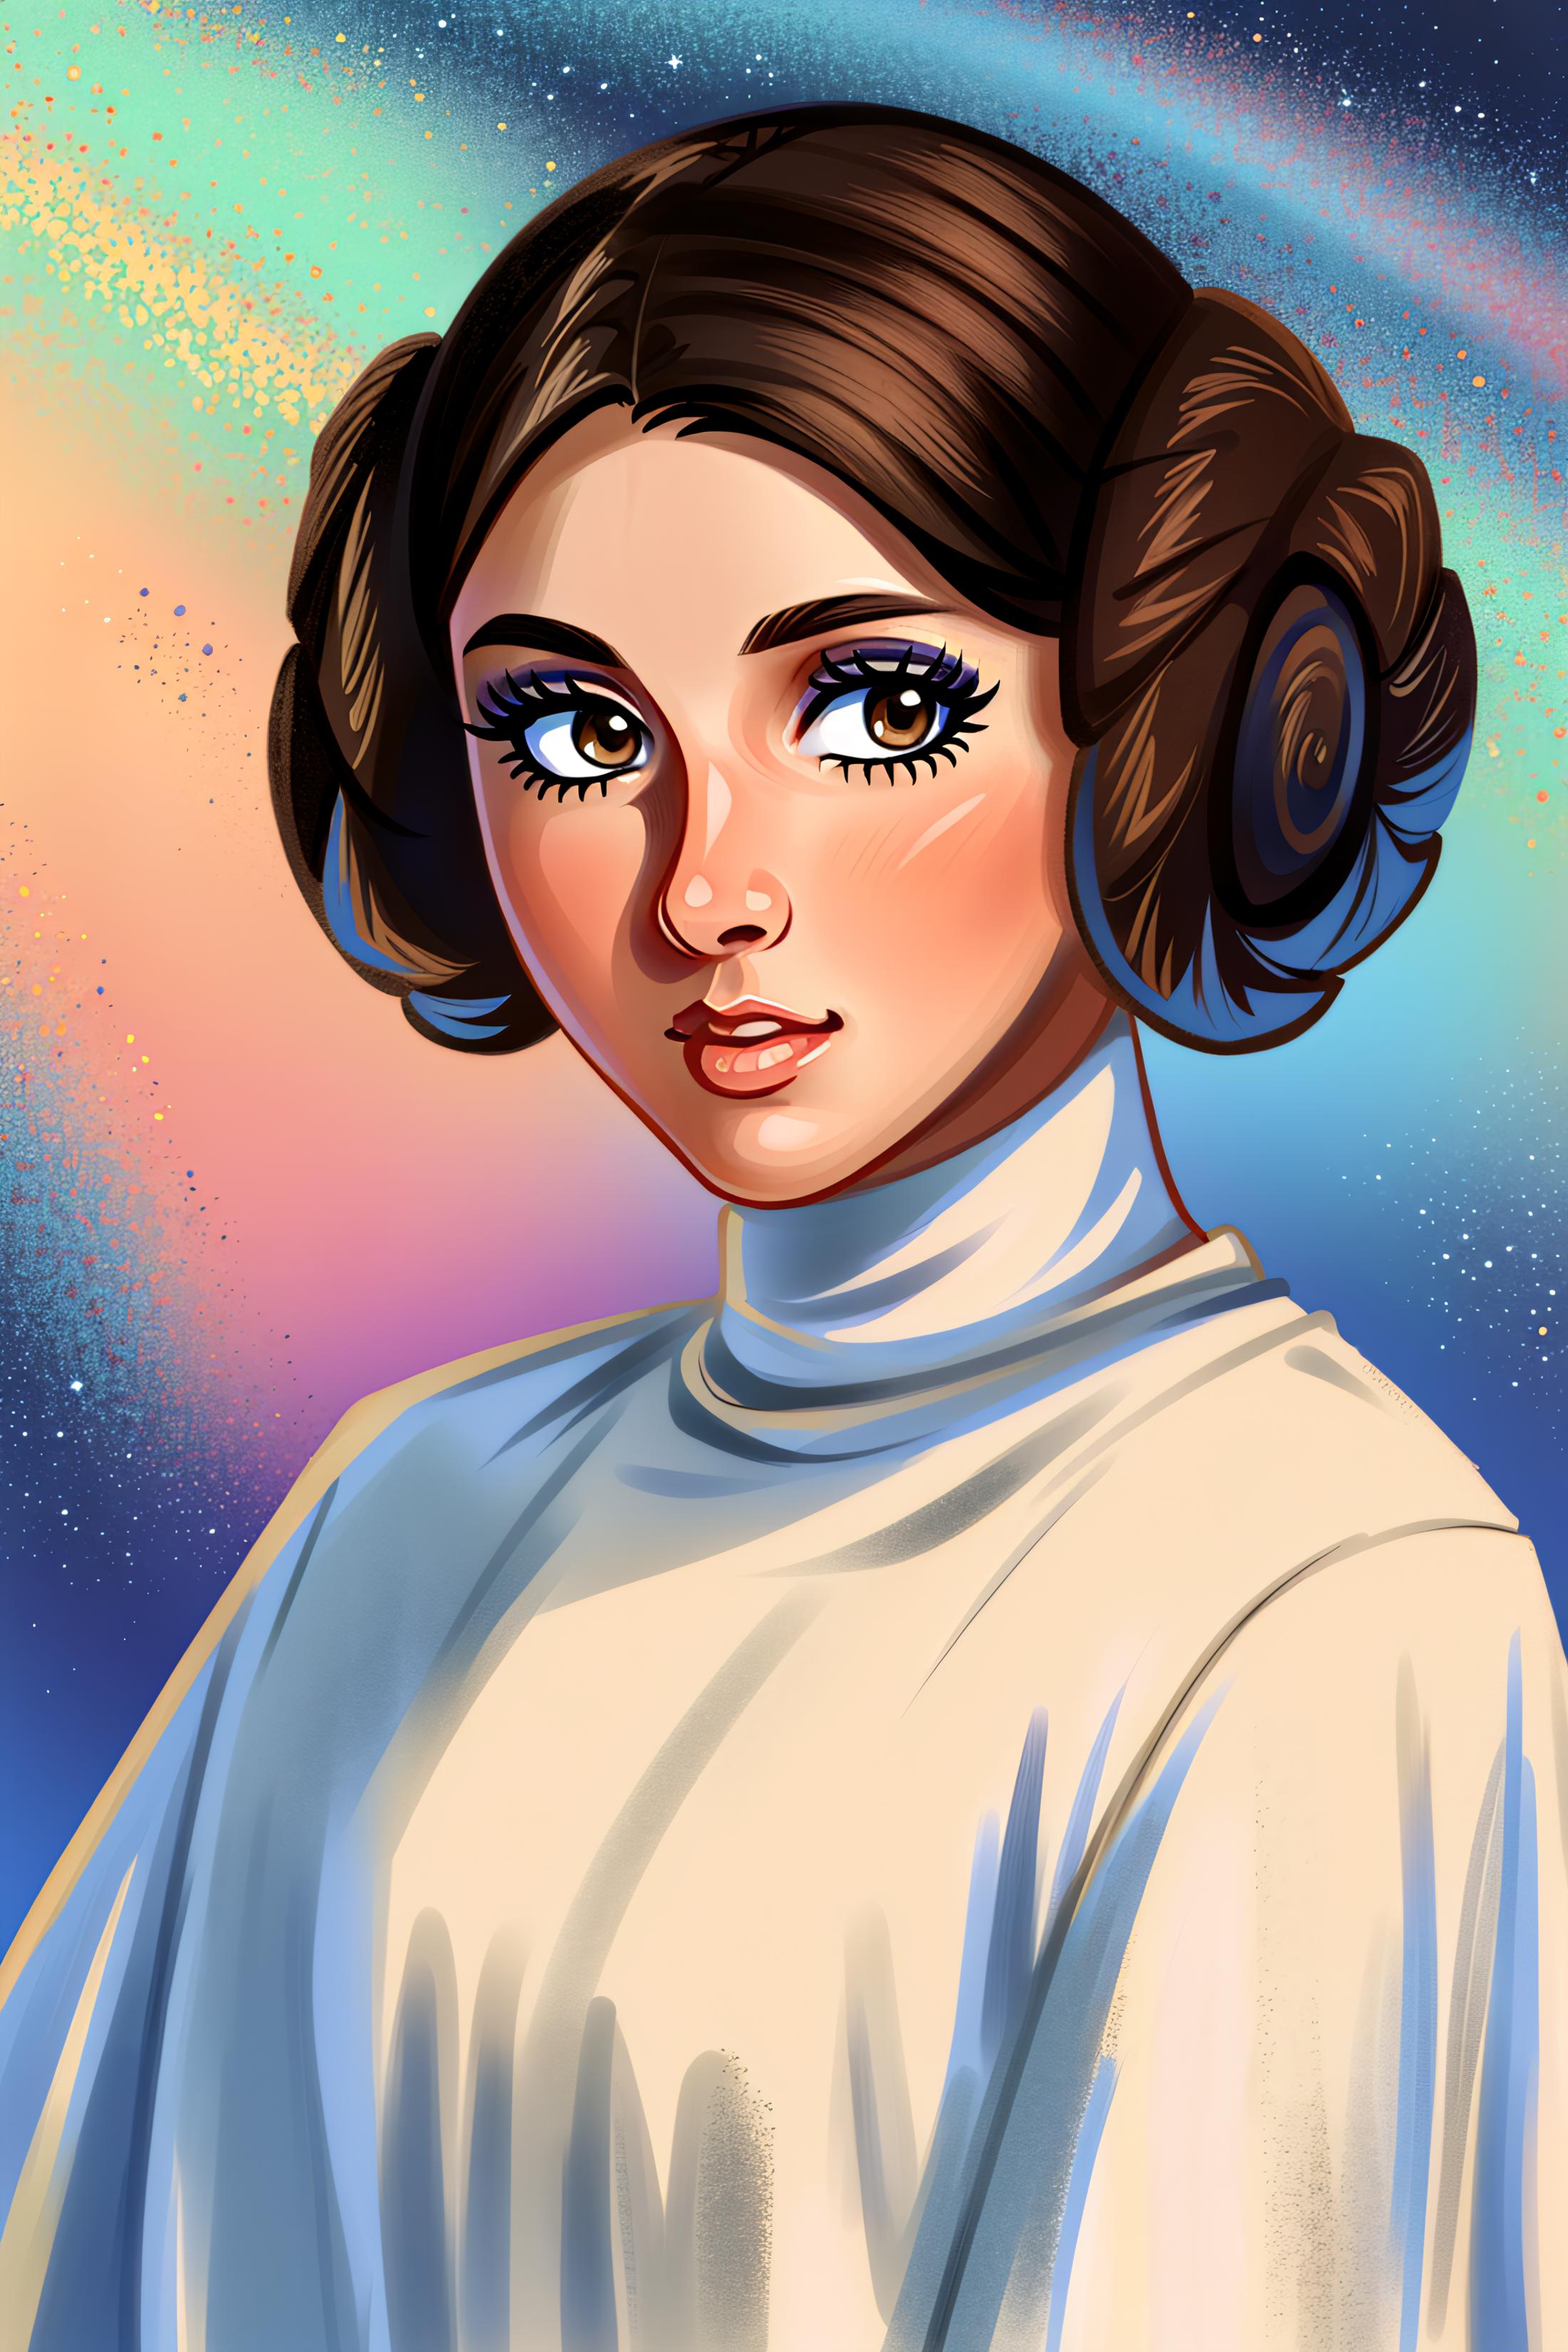 Leia_SD (Star Wars) image by twoundead